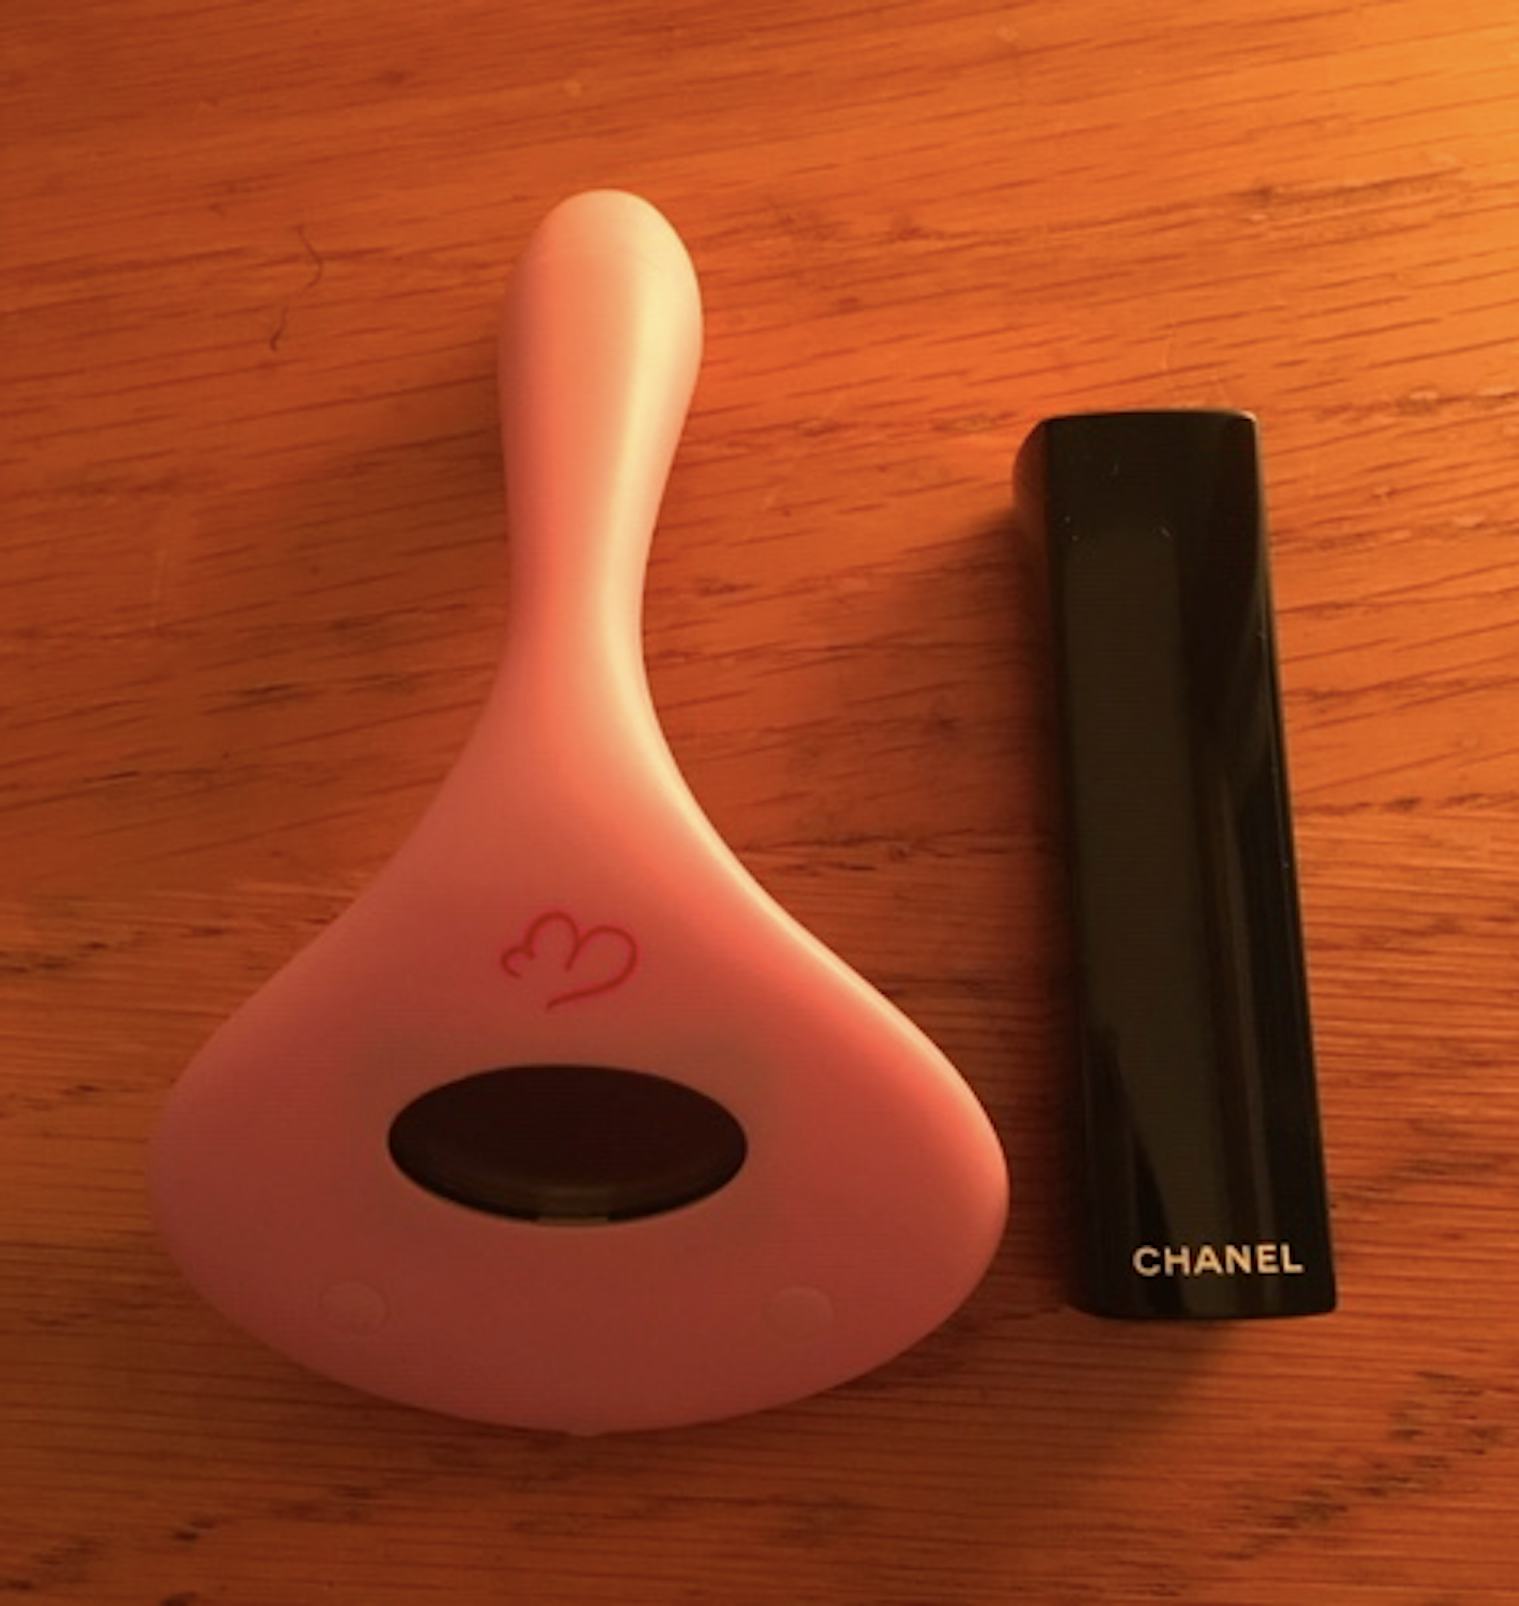 What Happened When I Used An Alarm Clock Vibrator To Wake Up For A Week